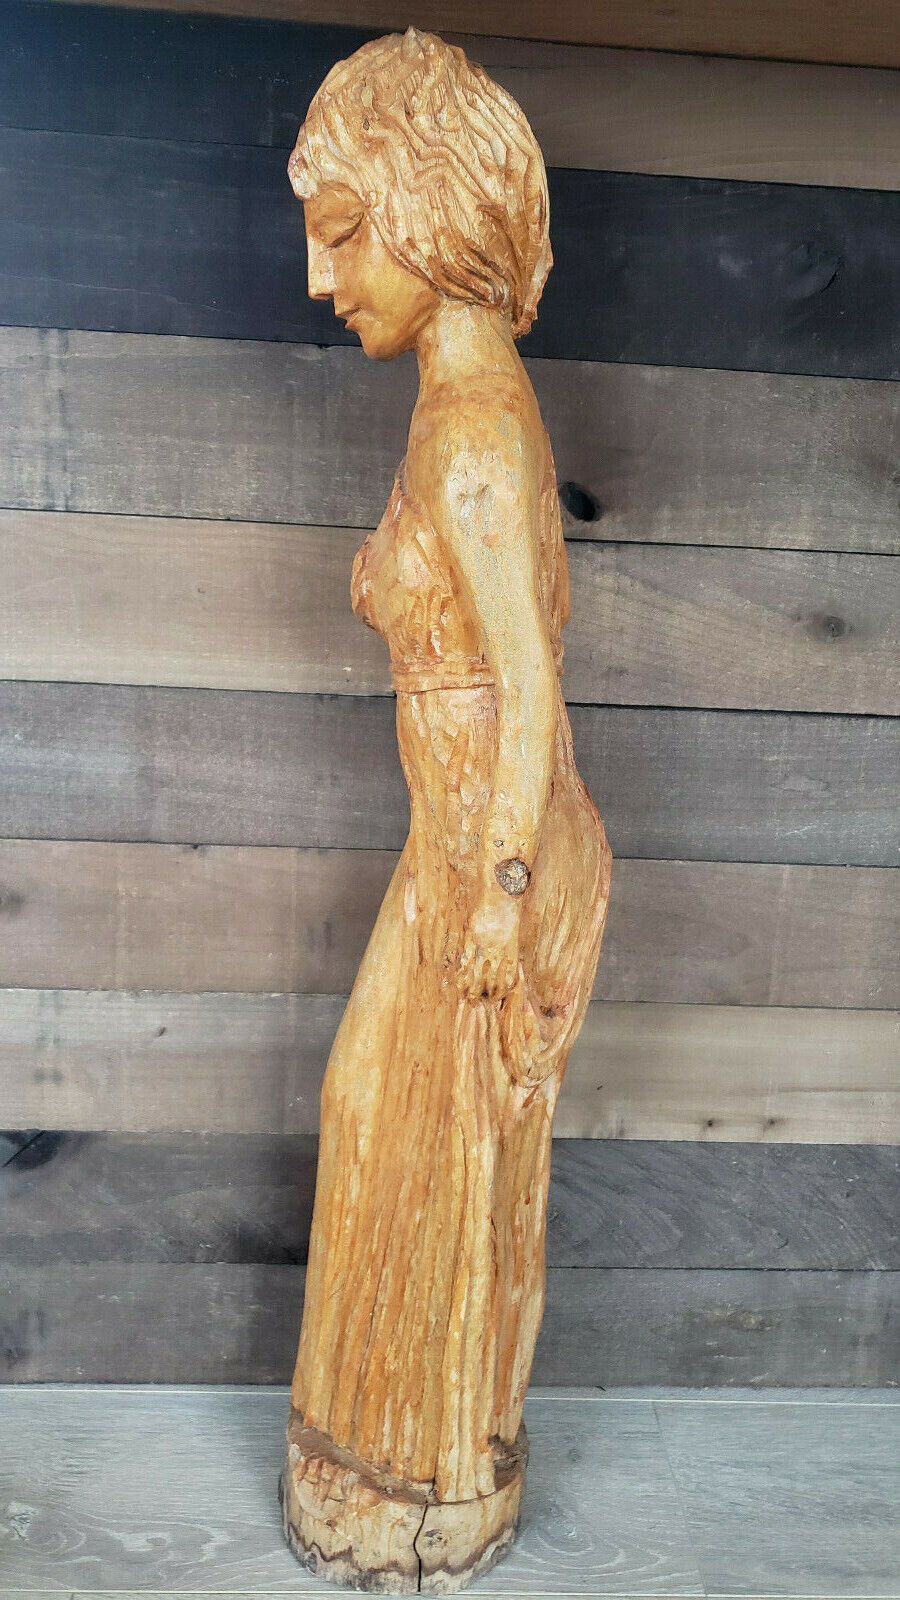 Rare Vintage Handcarved Wooden Statue of a Woman Holding Her Breast. 34" Без бренда - фотография #4